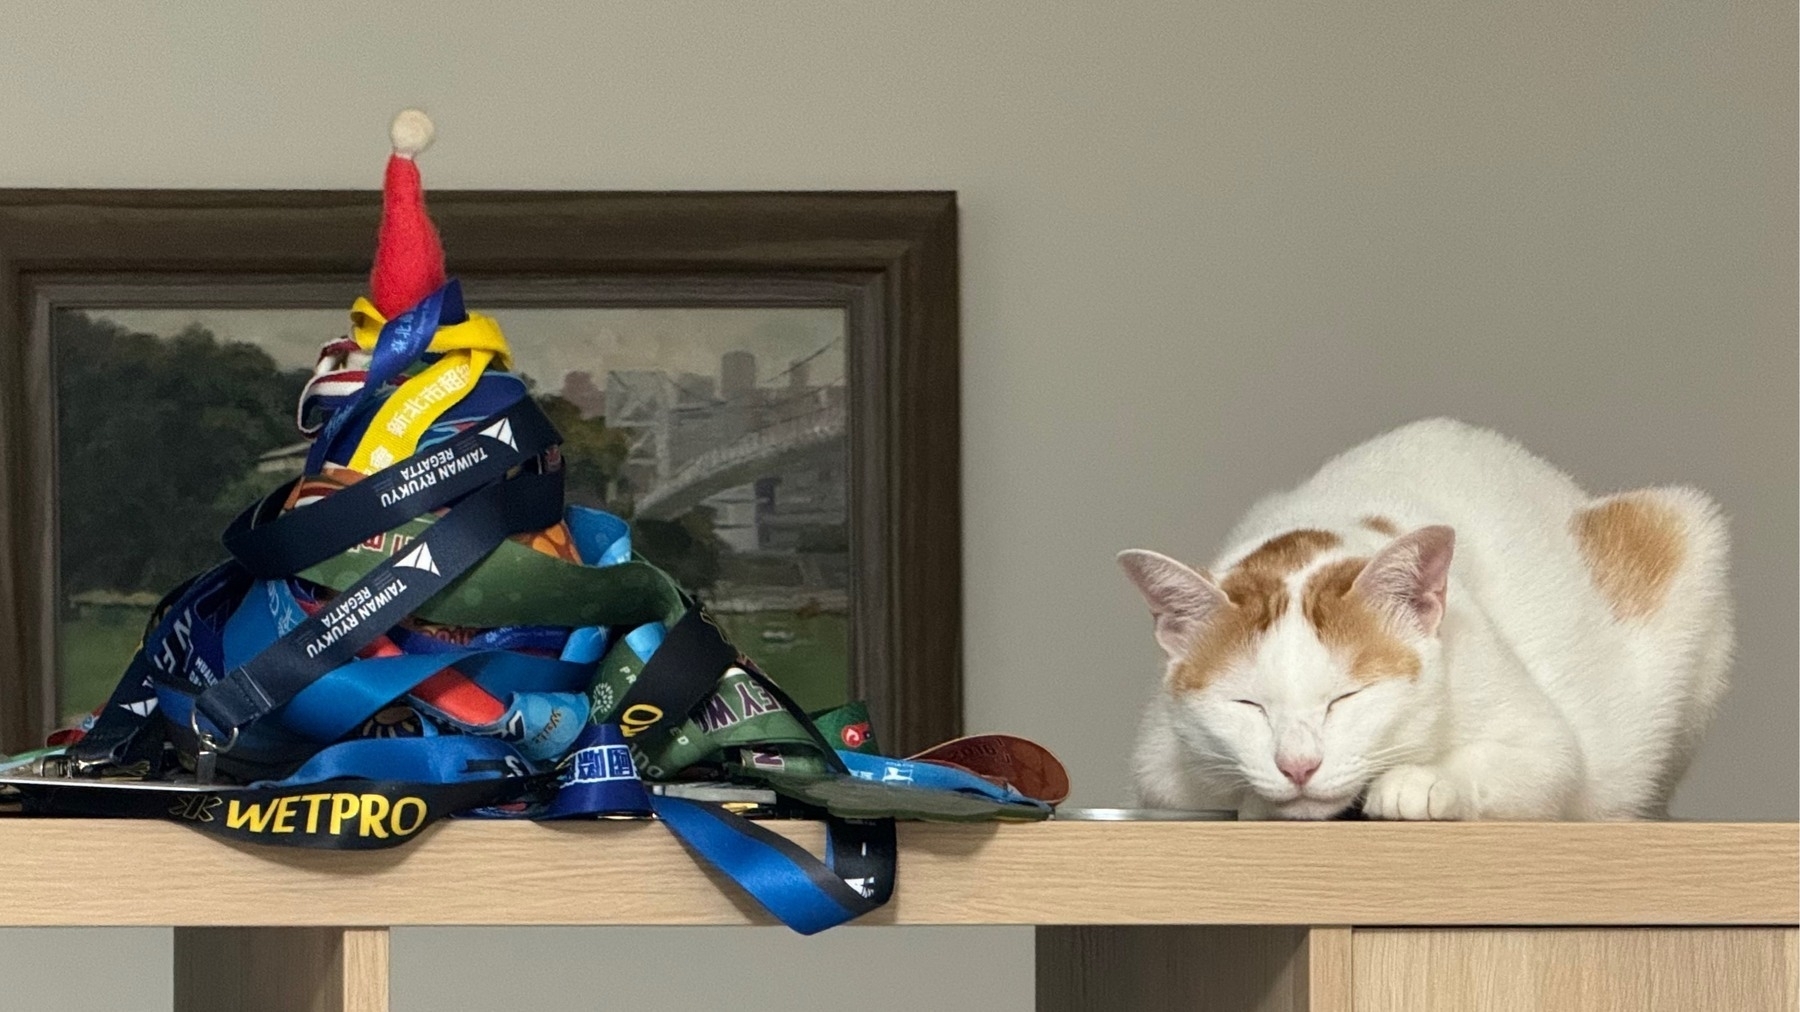 My white-and-ginger cat asleep and looking cute on a shelf, next to an irrelevant colourful mess of competition medals. It's all about the cat.